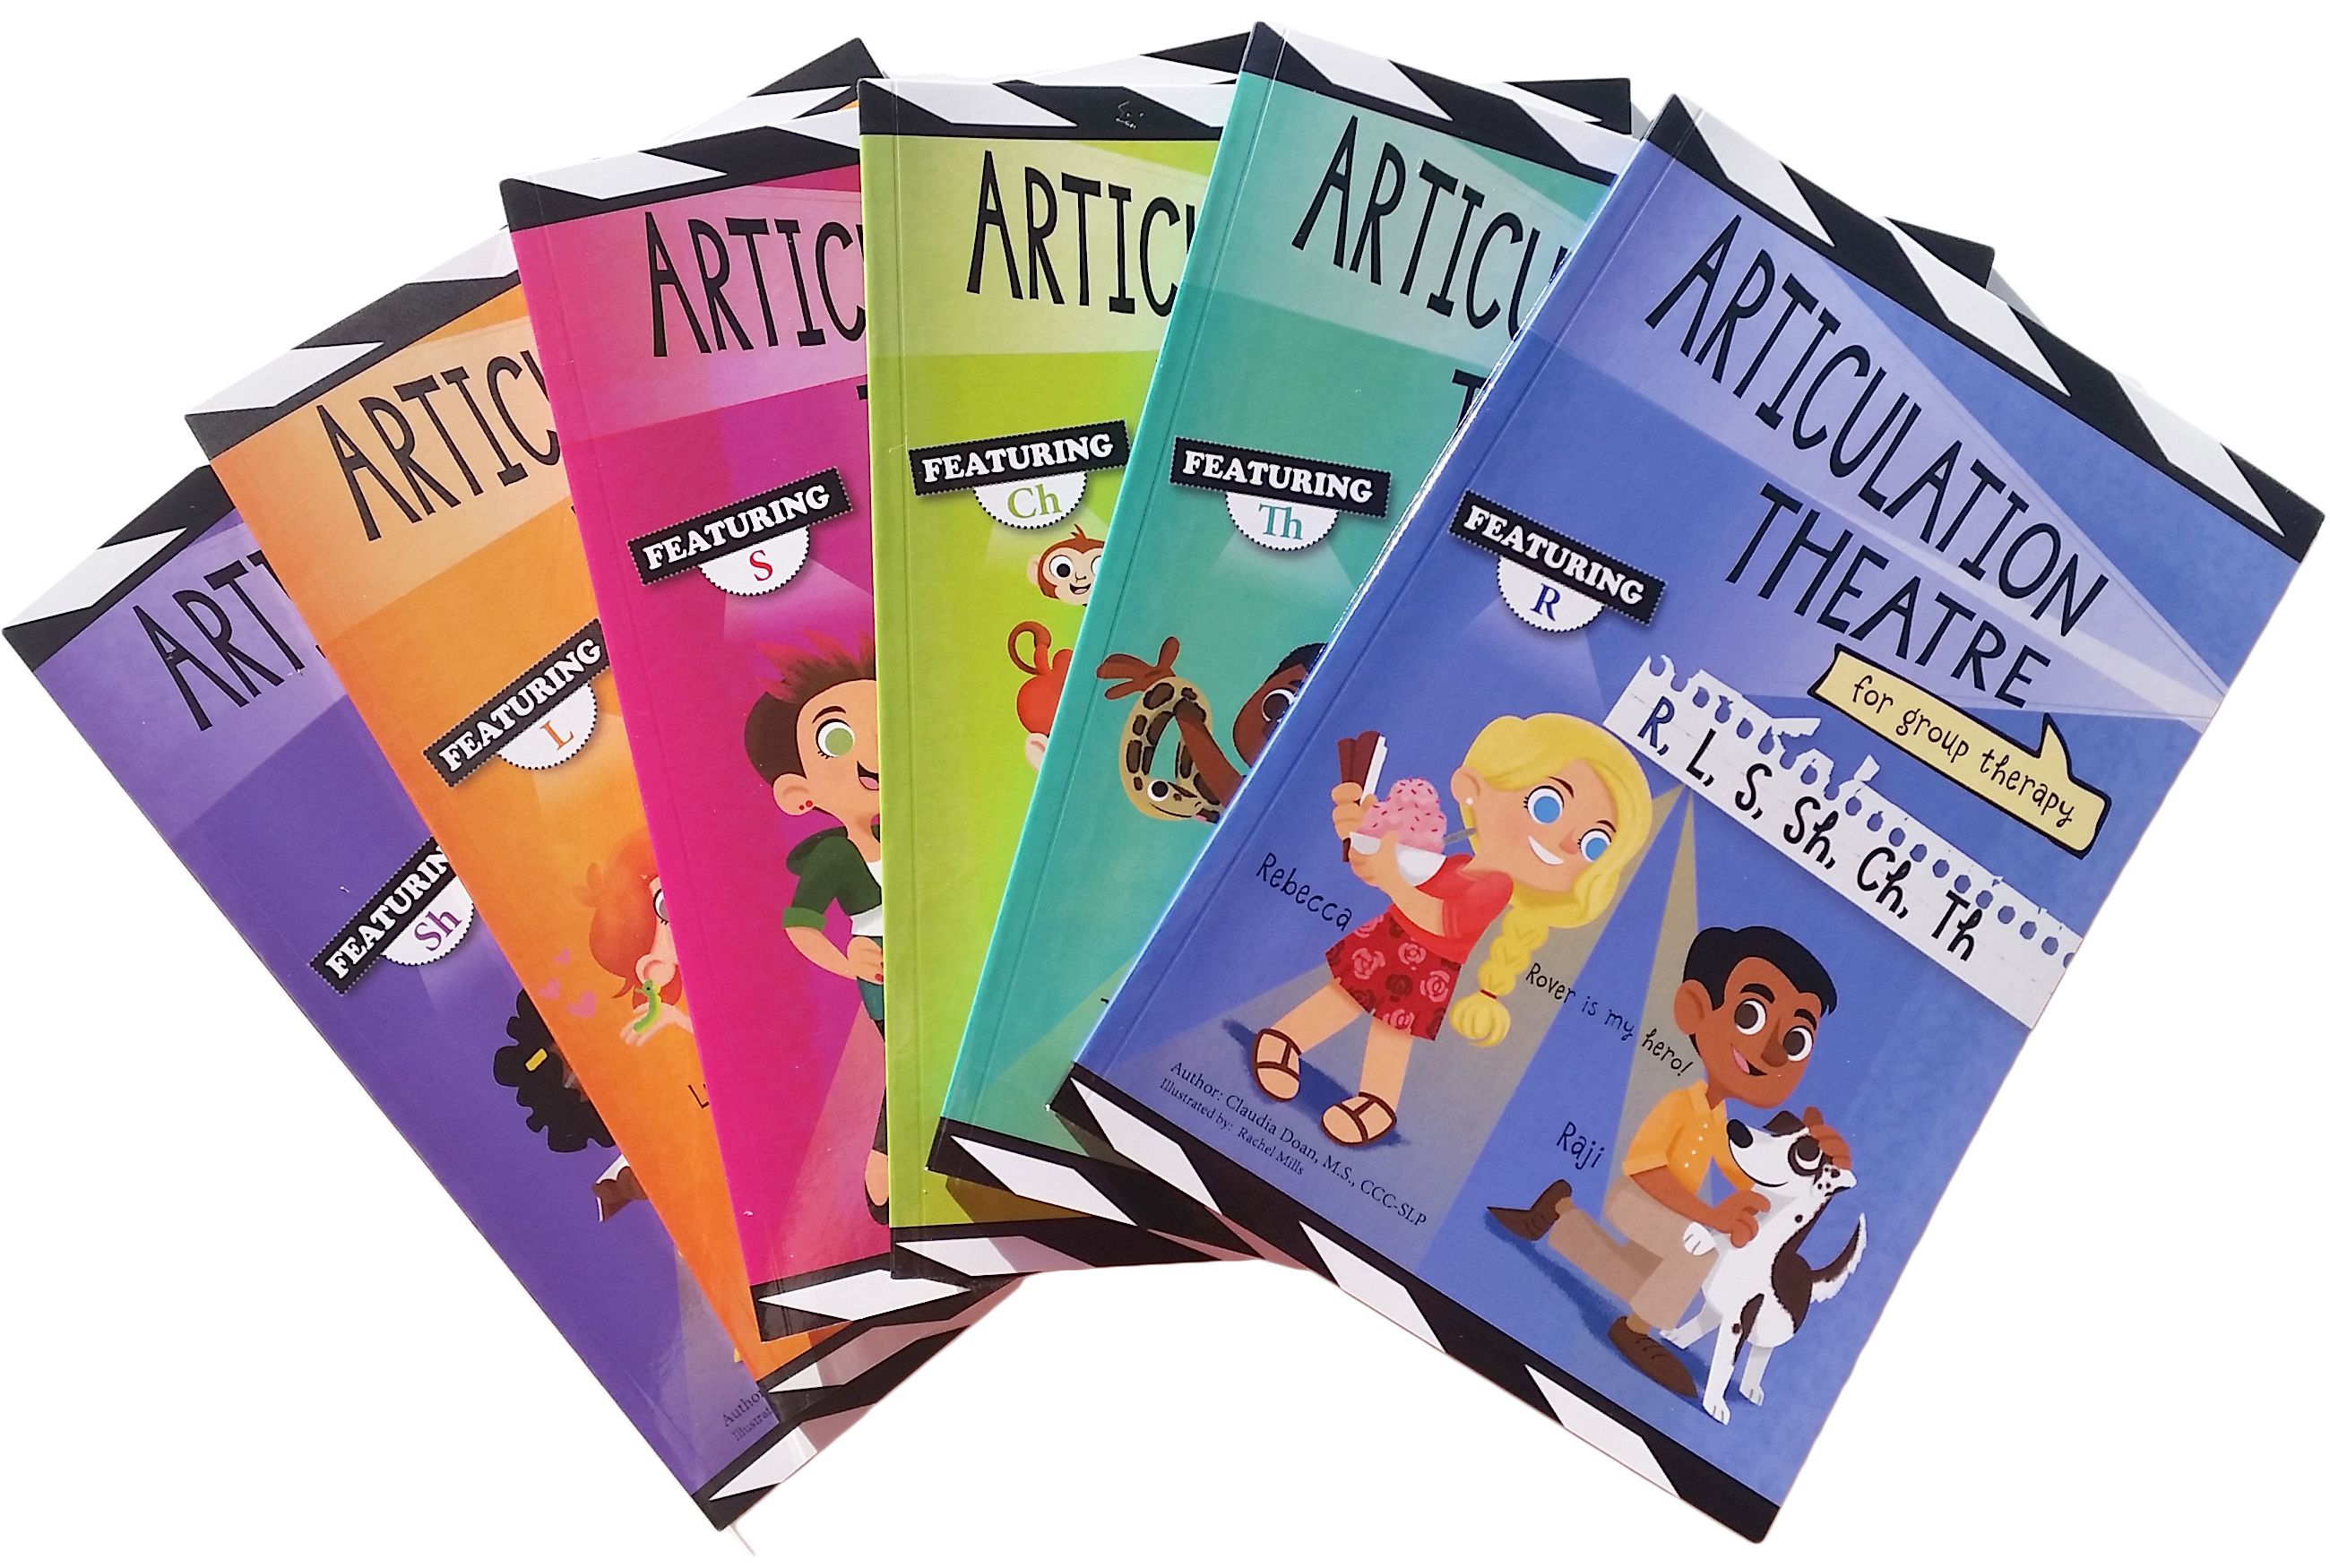 Articulation Theatre Speech Therapy Materials